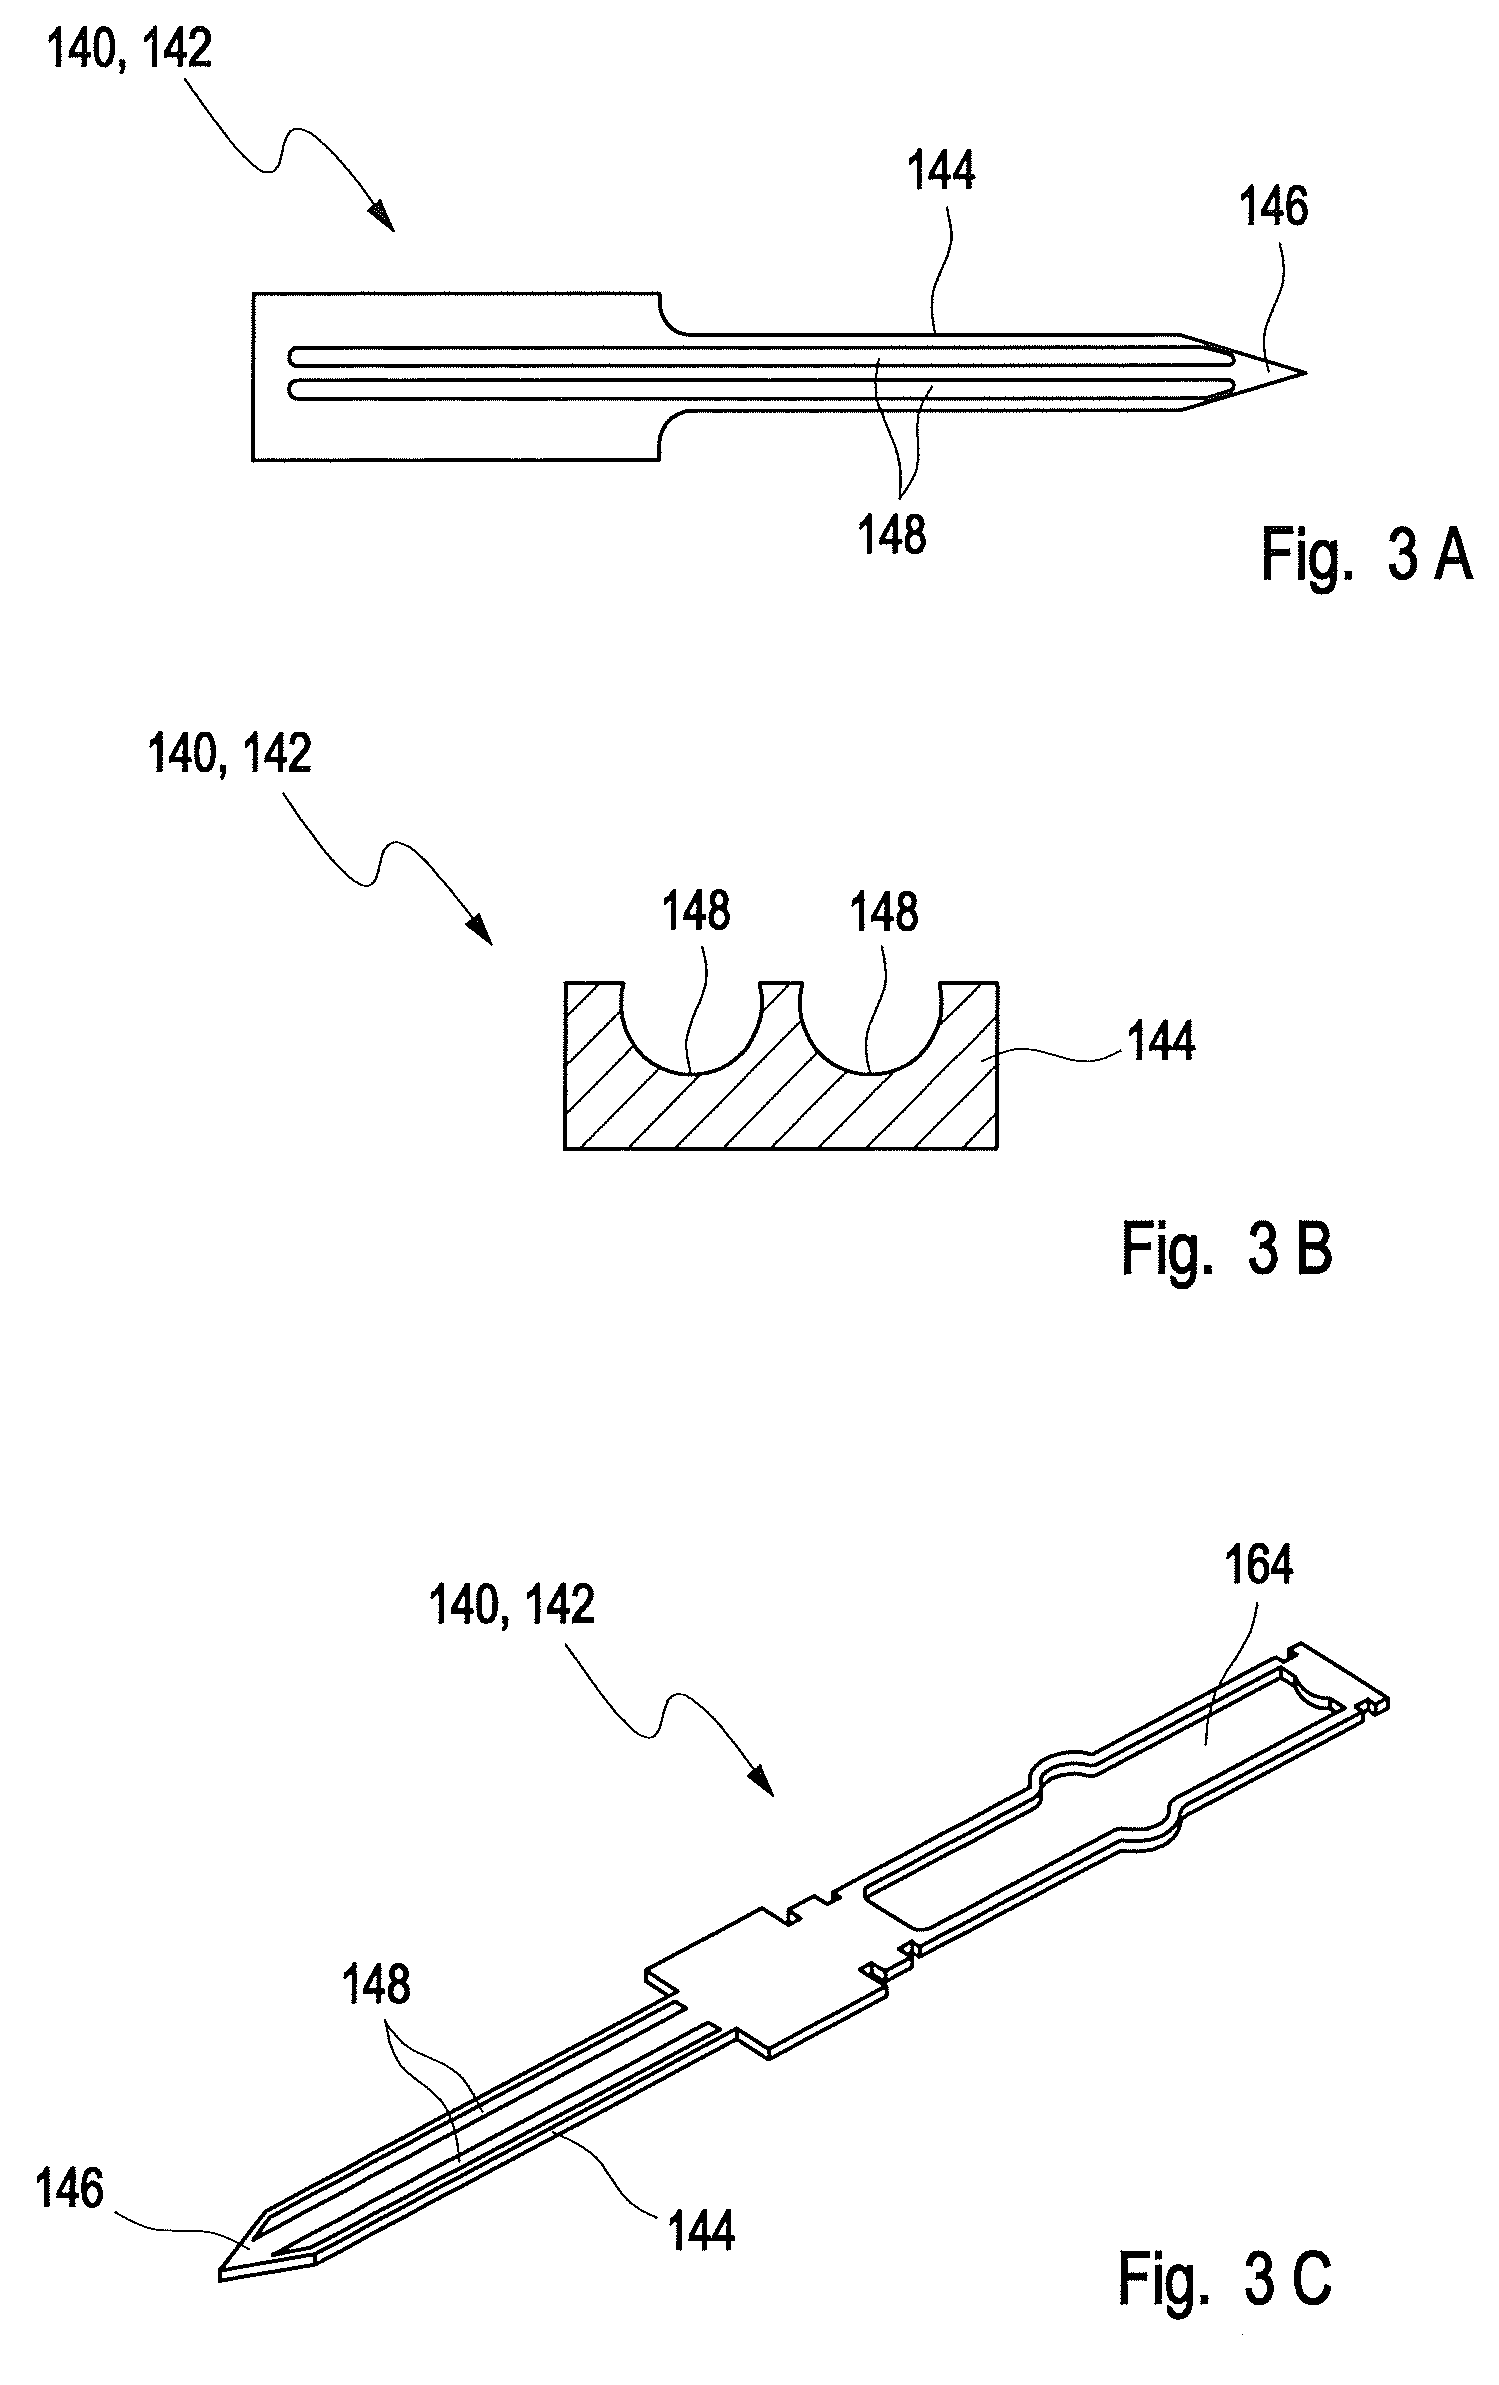 Method and device for detecting an analyte in a body fluid